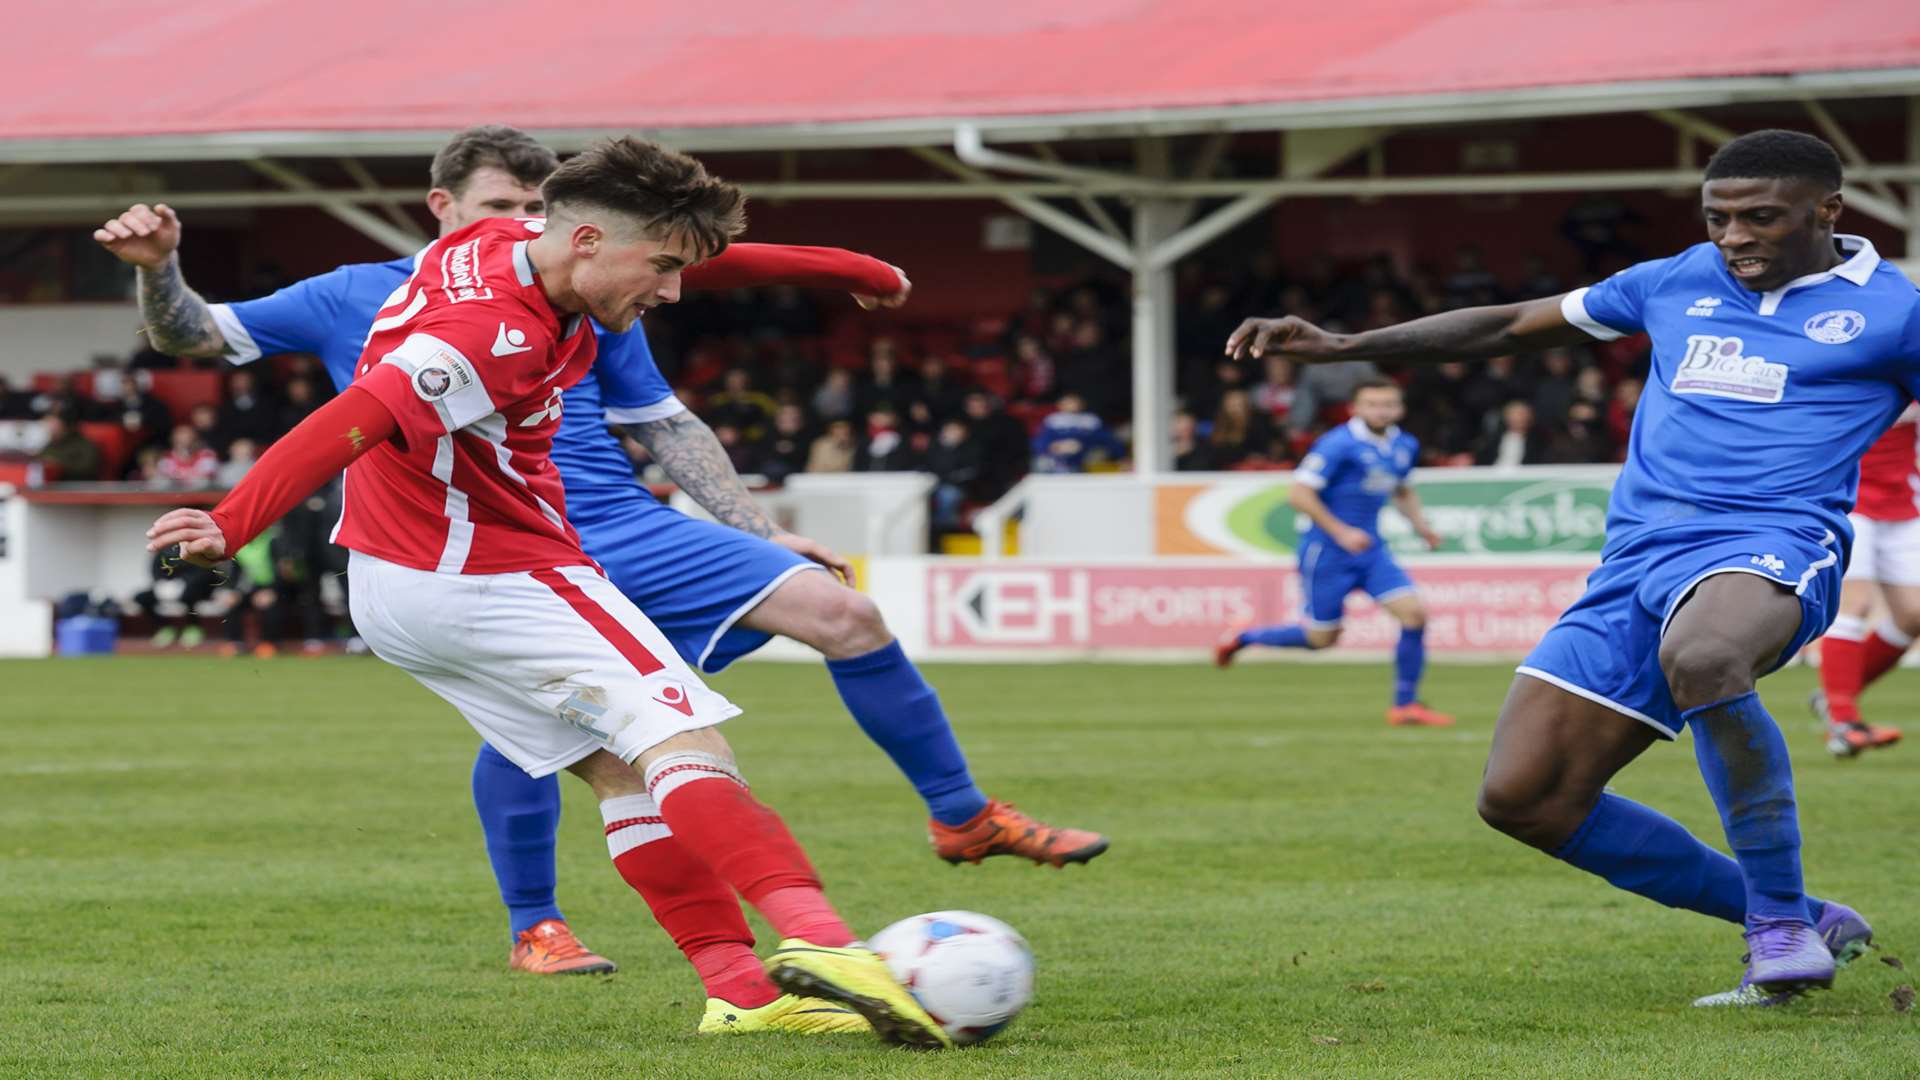 Sean Shields scores for Ebbsfleet against Chelmsford Picture: Andy Payton